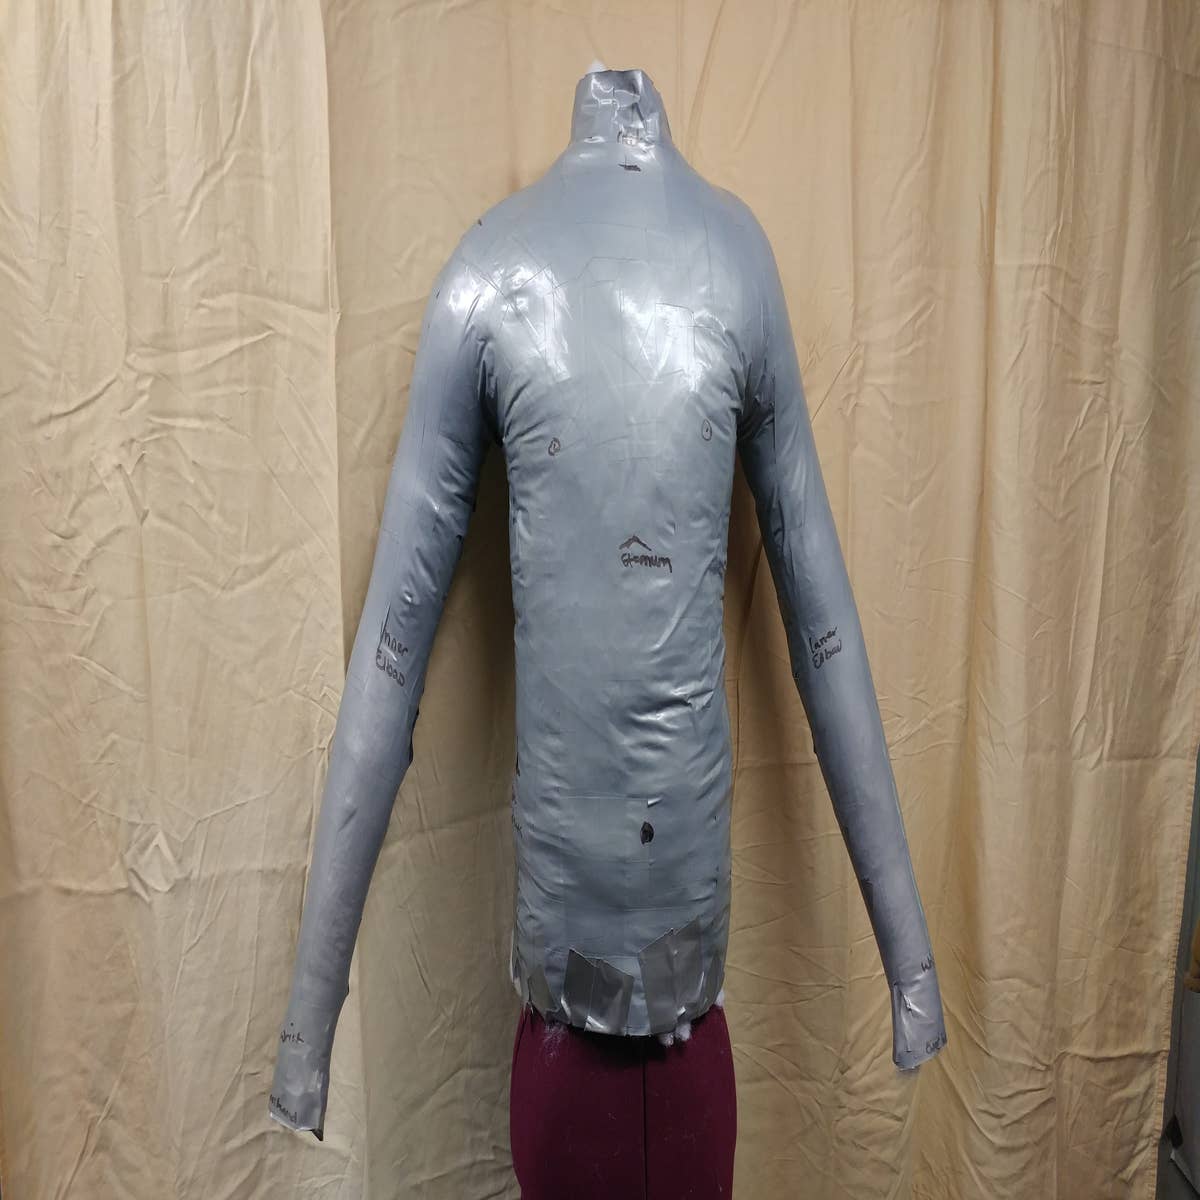 Making a Duct Tape Dummy 